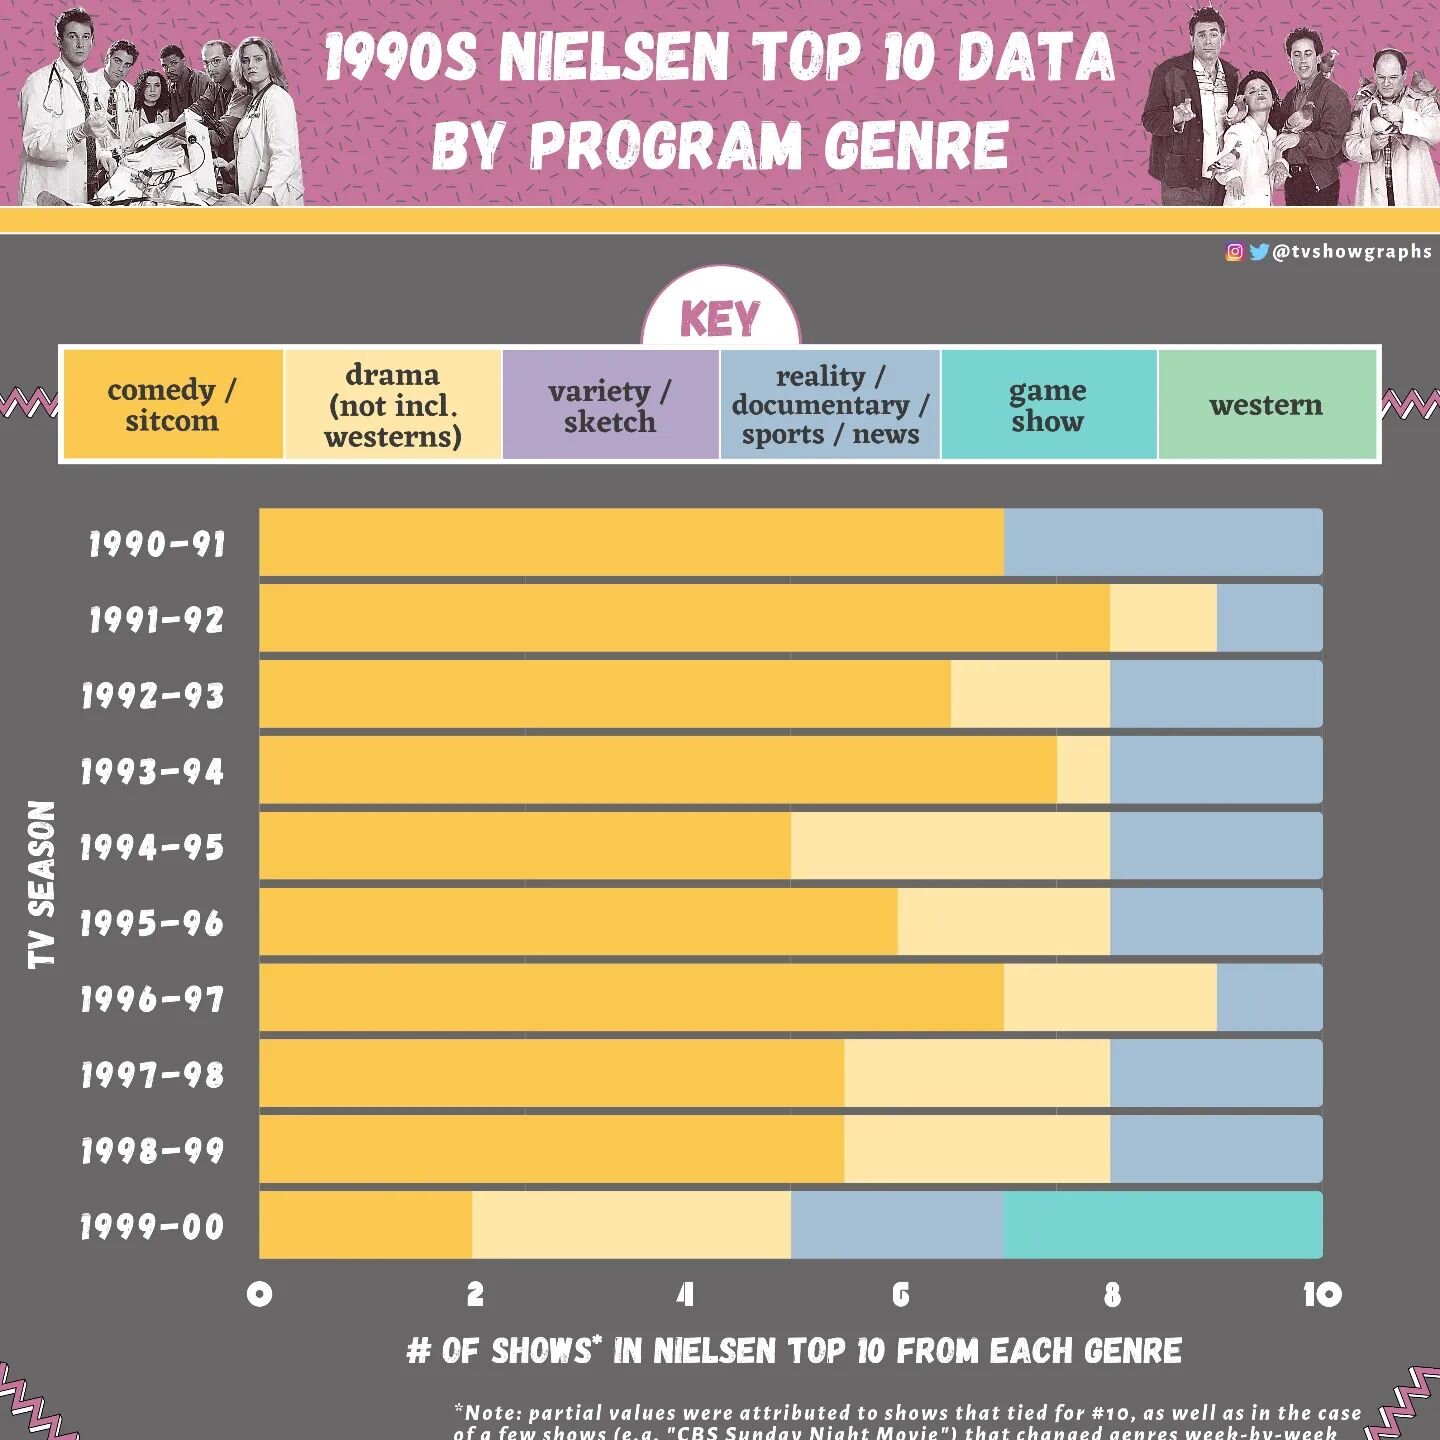 Hello, 90s! This is my fifth Nielsen Top 10 Data by Program Genre graph... and I'm way too much of a completionist to stop until I've caught up to the present day!

The 90s starts off fairly similar to the late 80s with total sitcom domination (but a